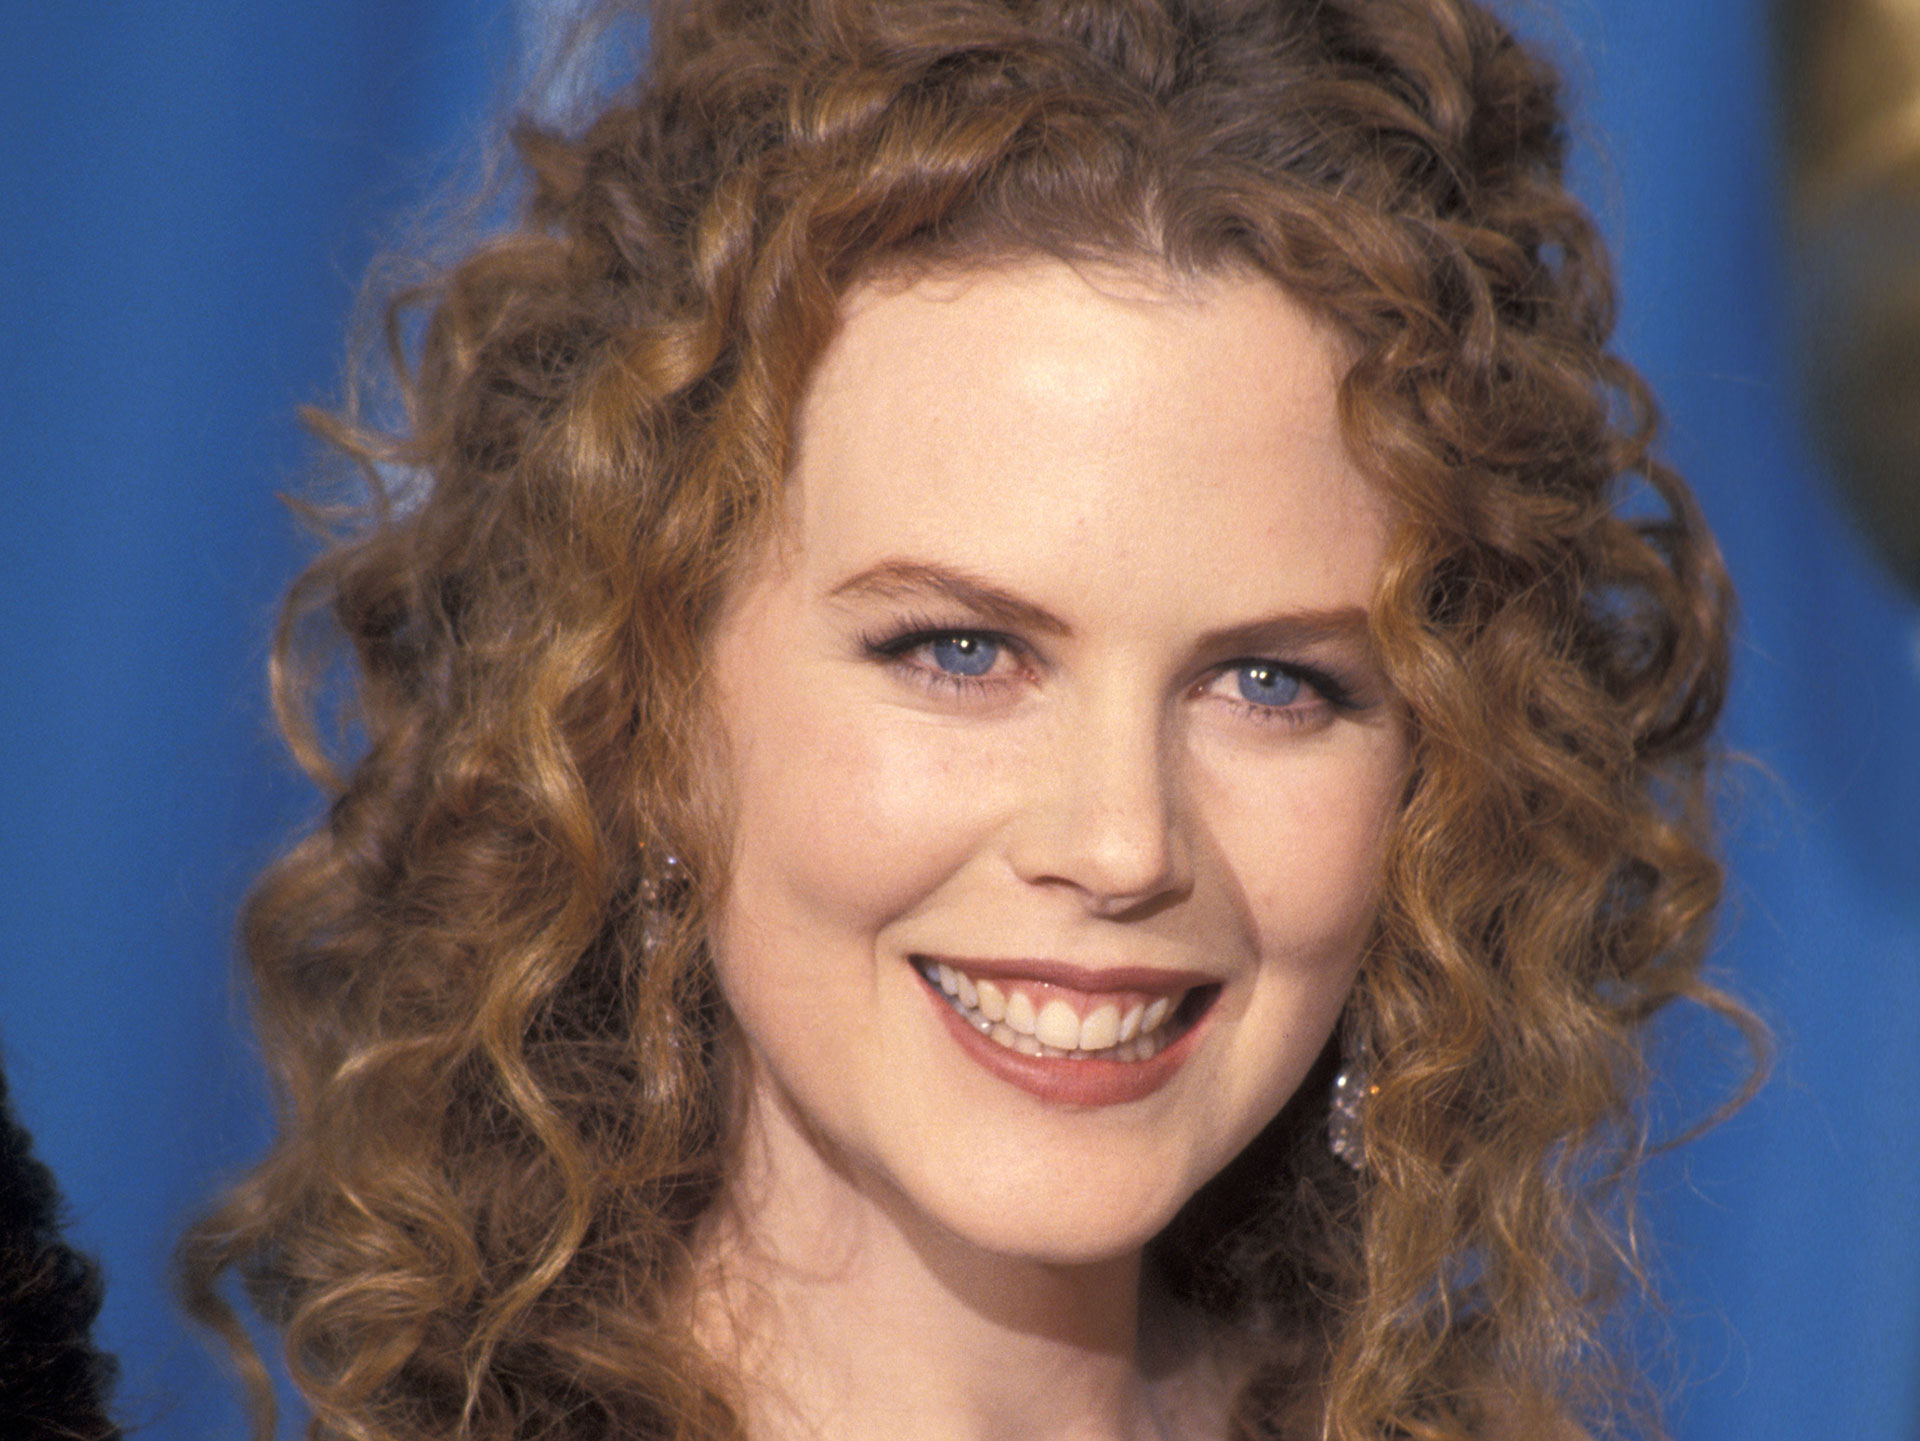 Nicole Kidman at the Academy Awards in 1994